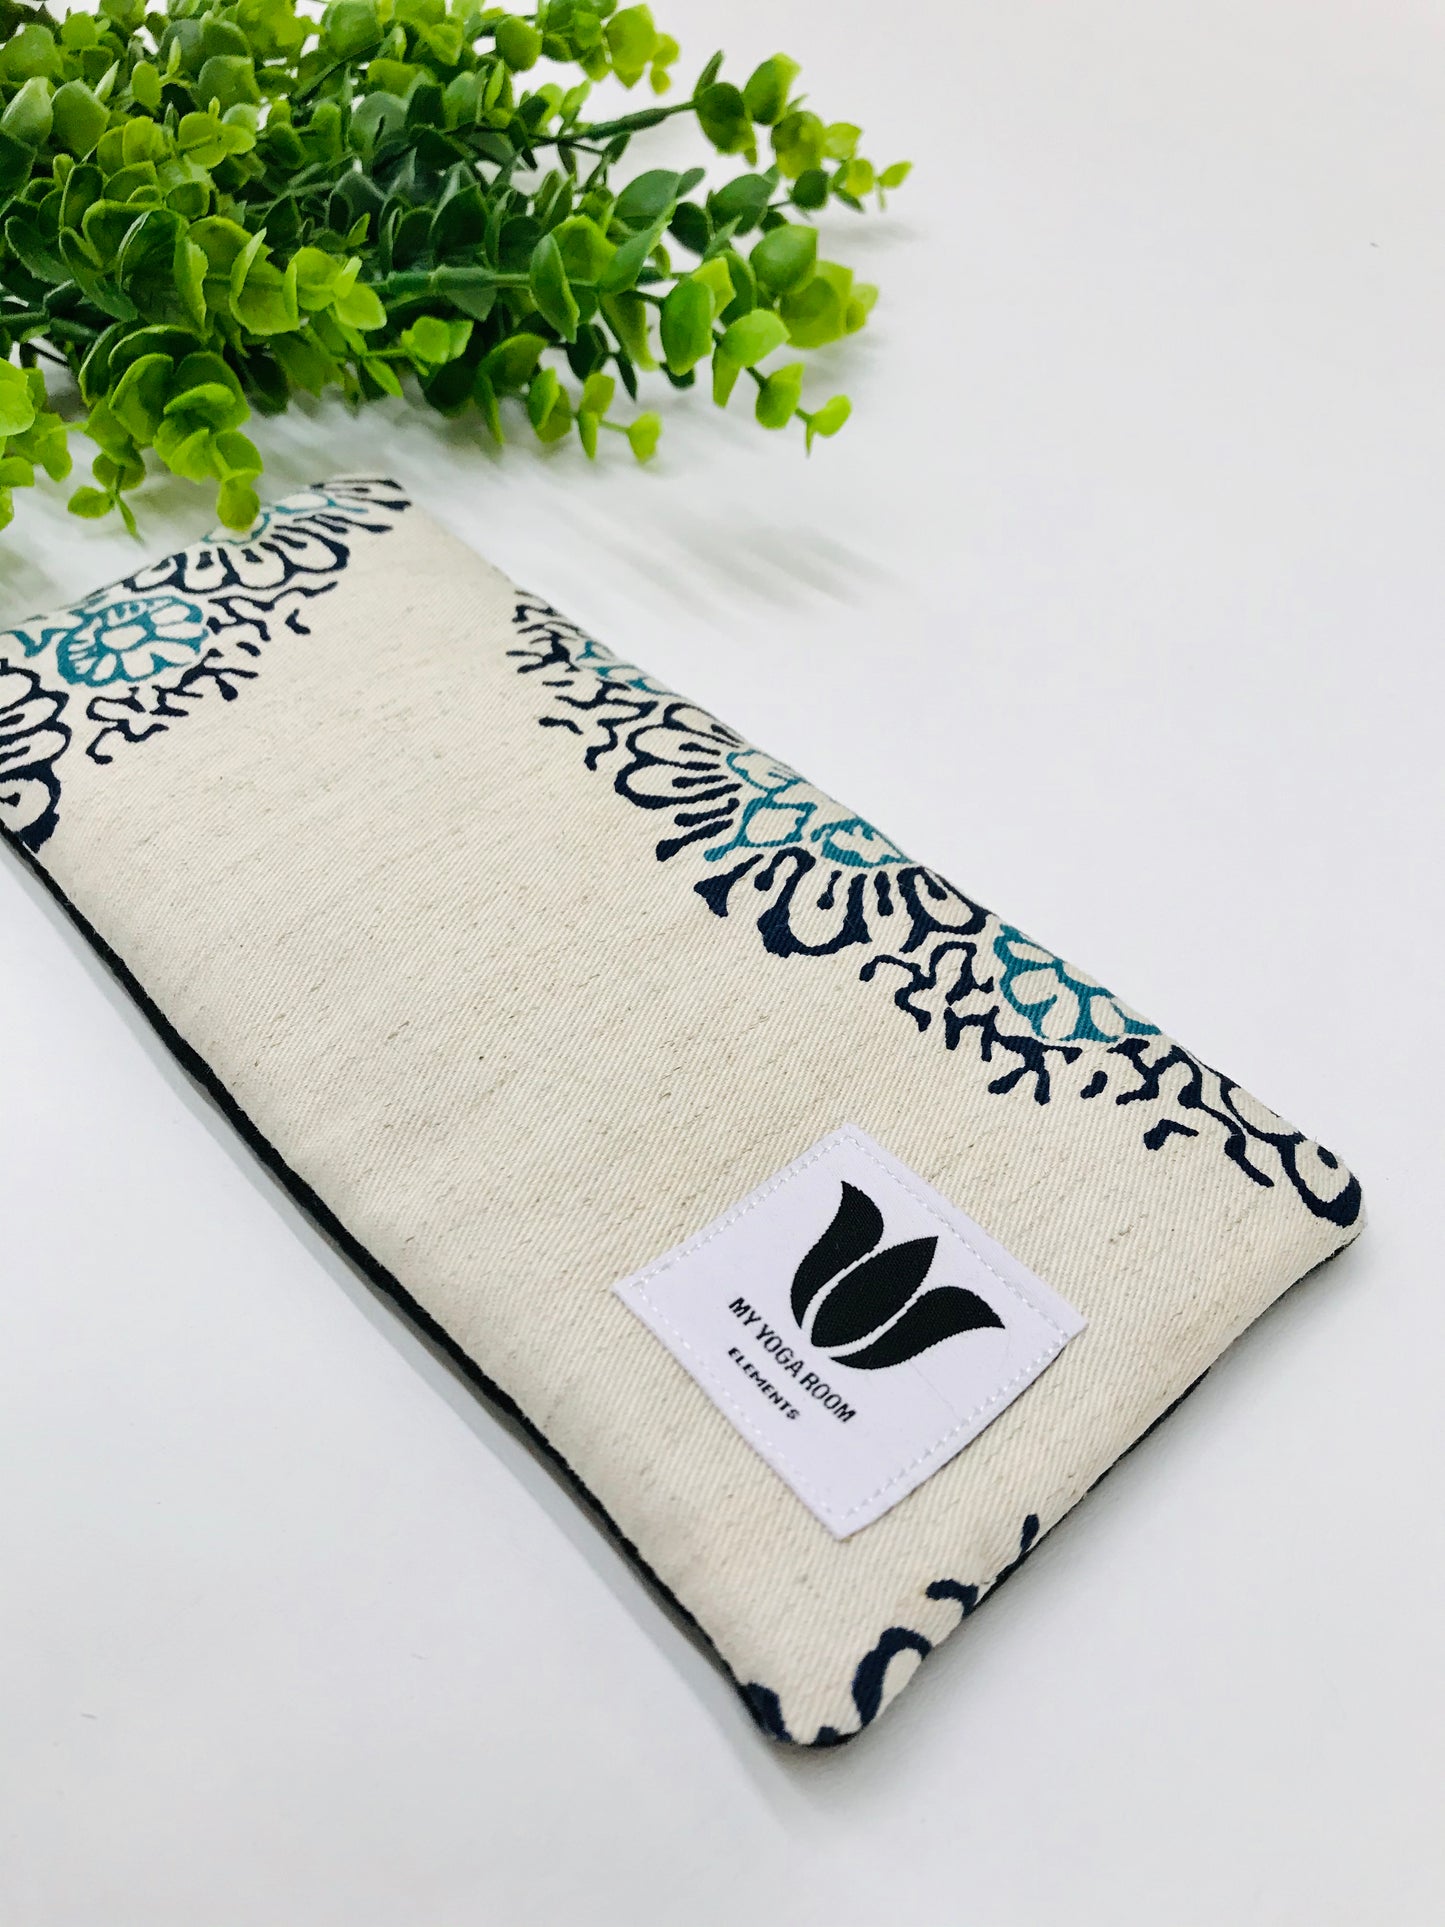 Yoga pillow, therapeutically weighted to soothe eye strain and stress in natural linen and bamboo mandala fabric. Handcrafted in Canada by My Yoga Room Elements.